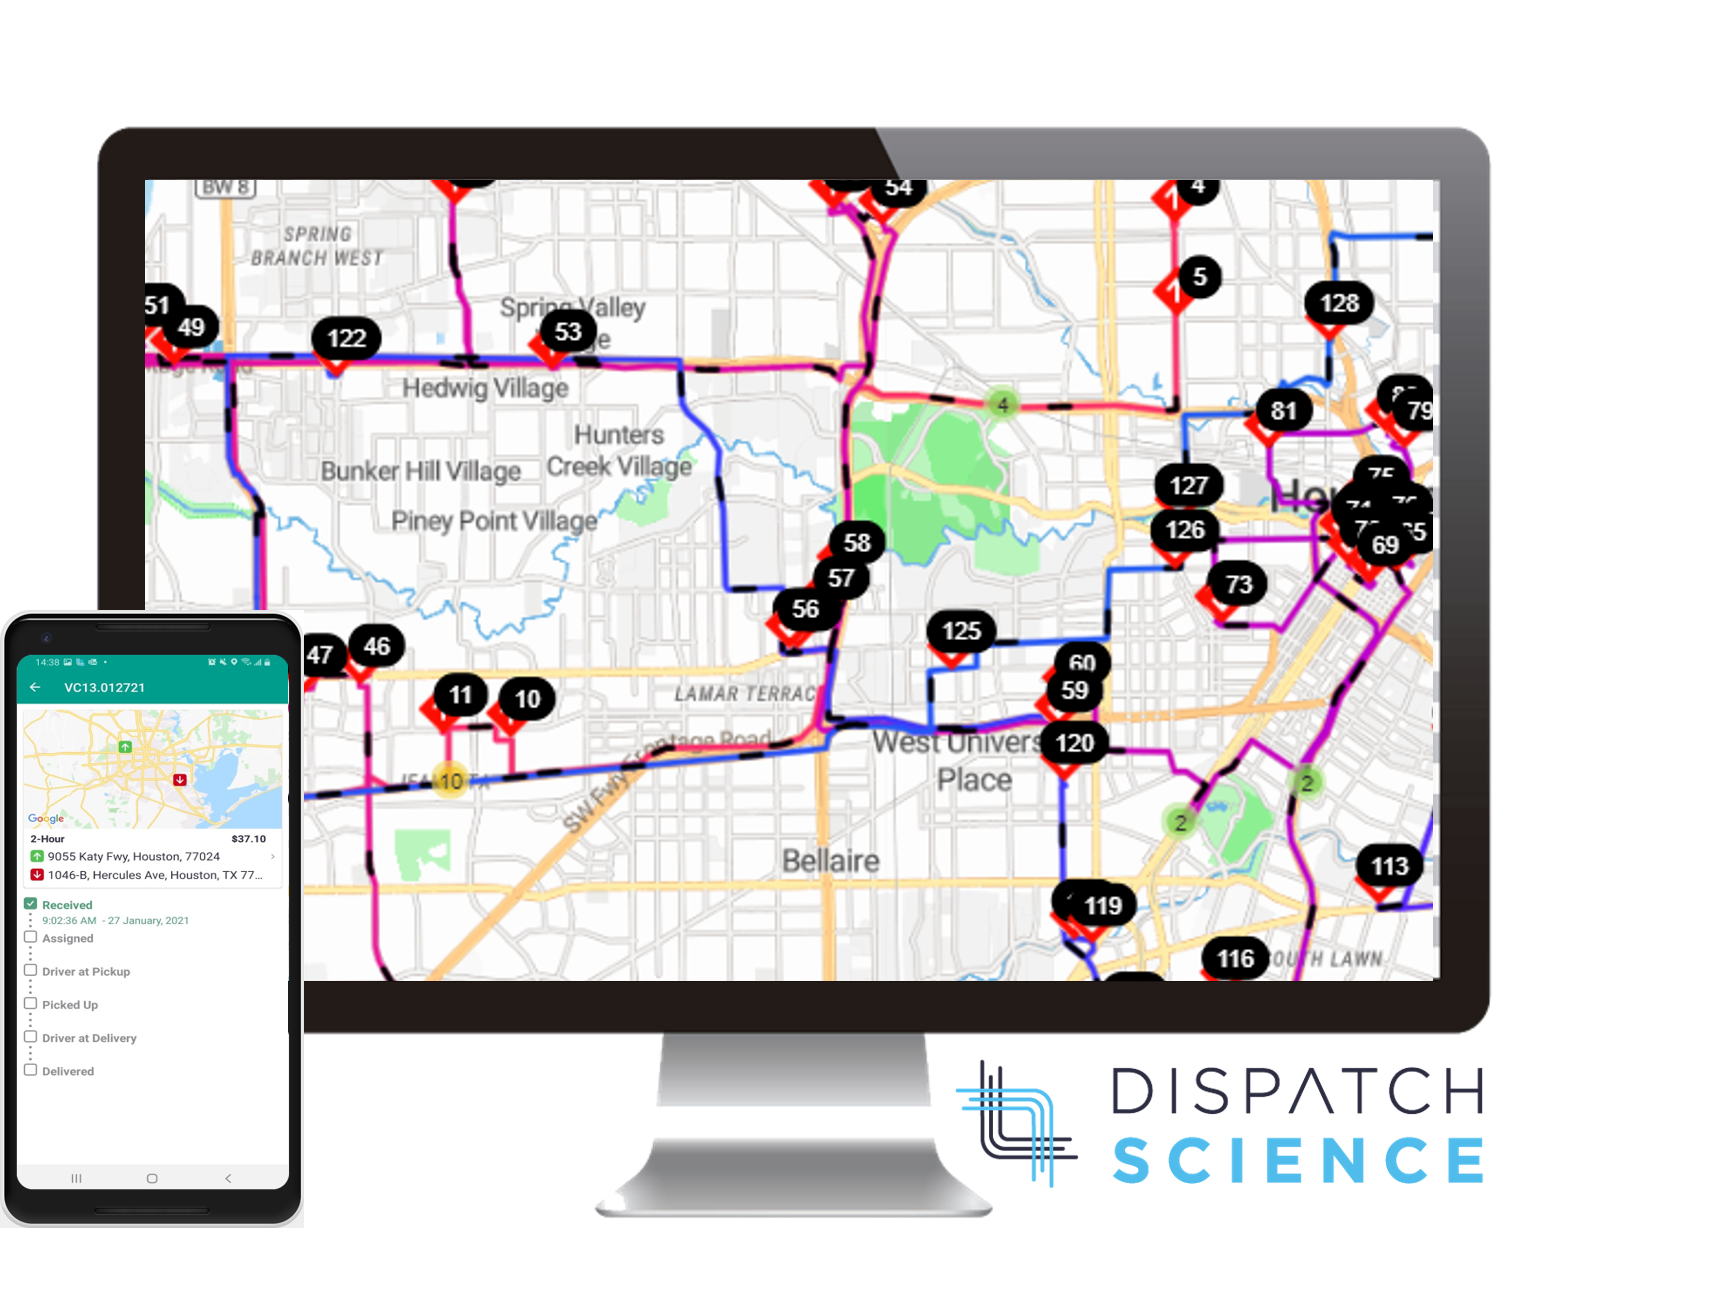 Dispatch Science Software - Powerful dynamic route optimization and dispatching